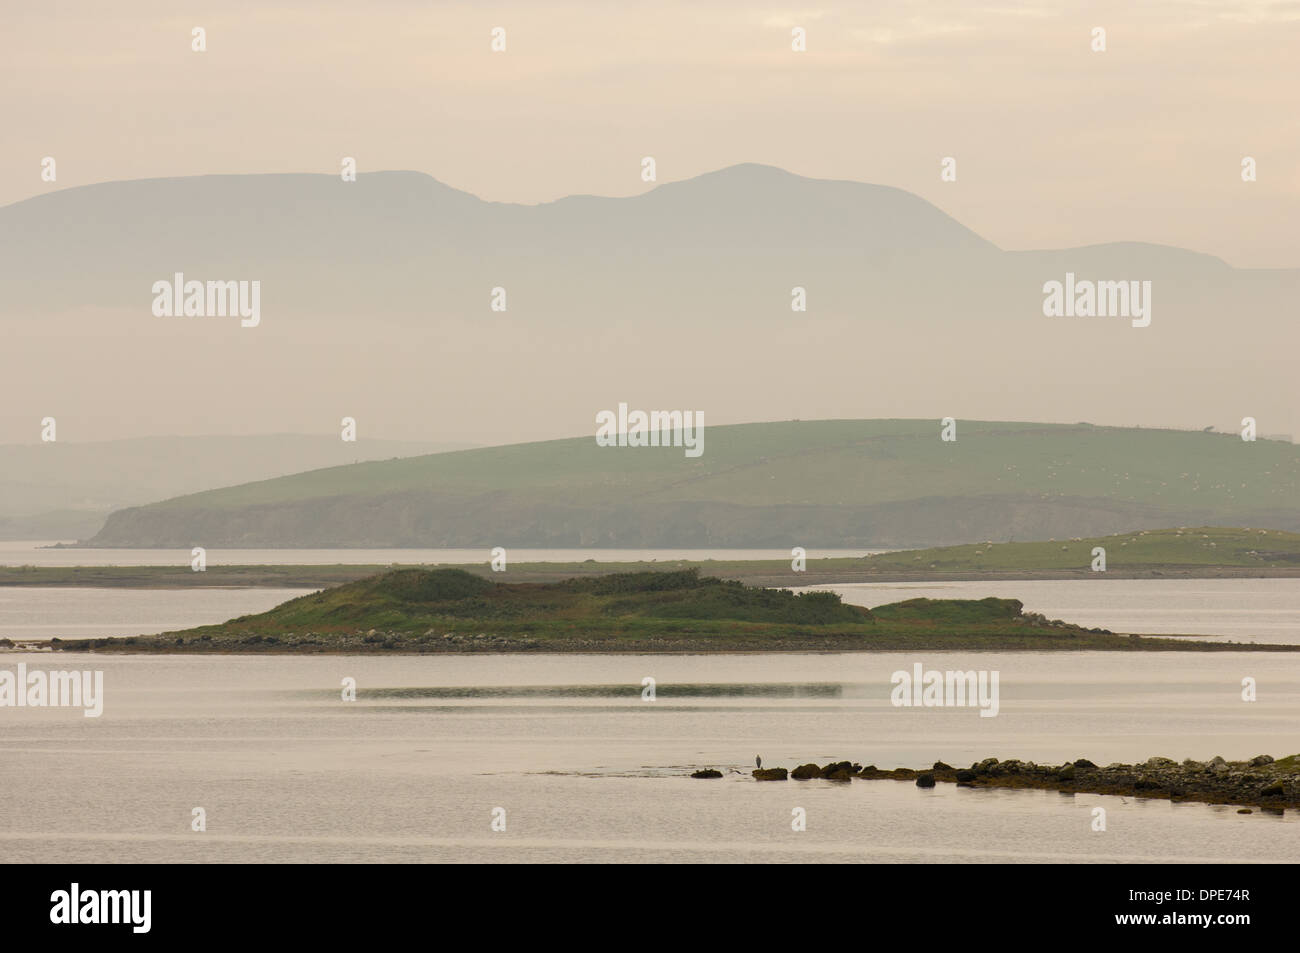 Islands on Clew Bay looming through the mist, Westport, County Mayo, Ireland Stock Photo